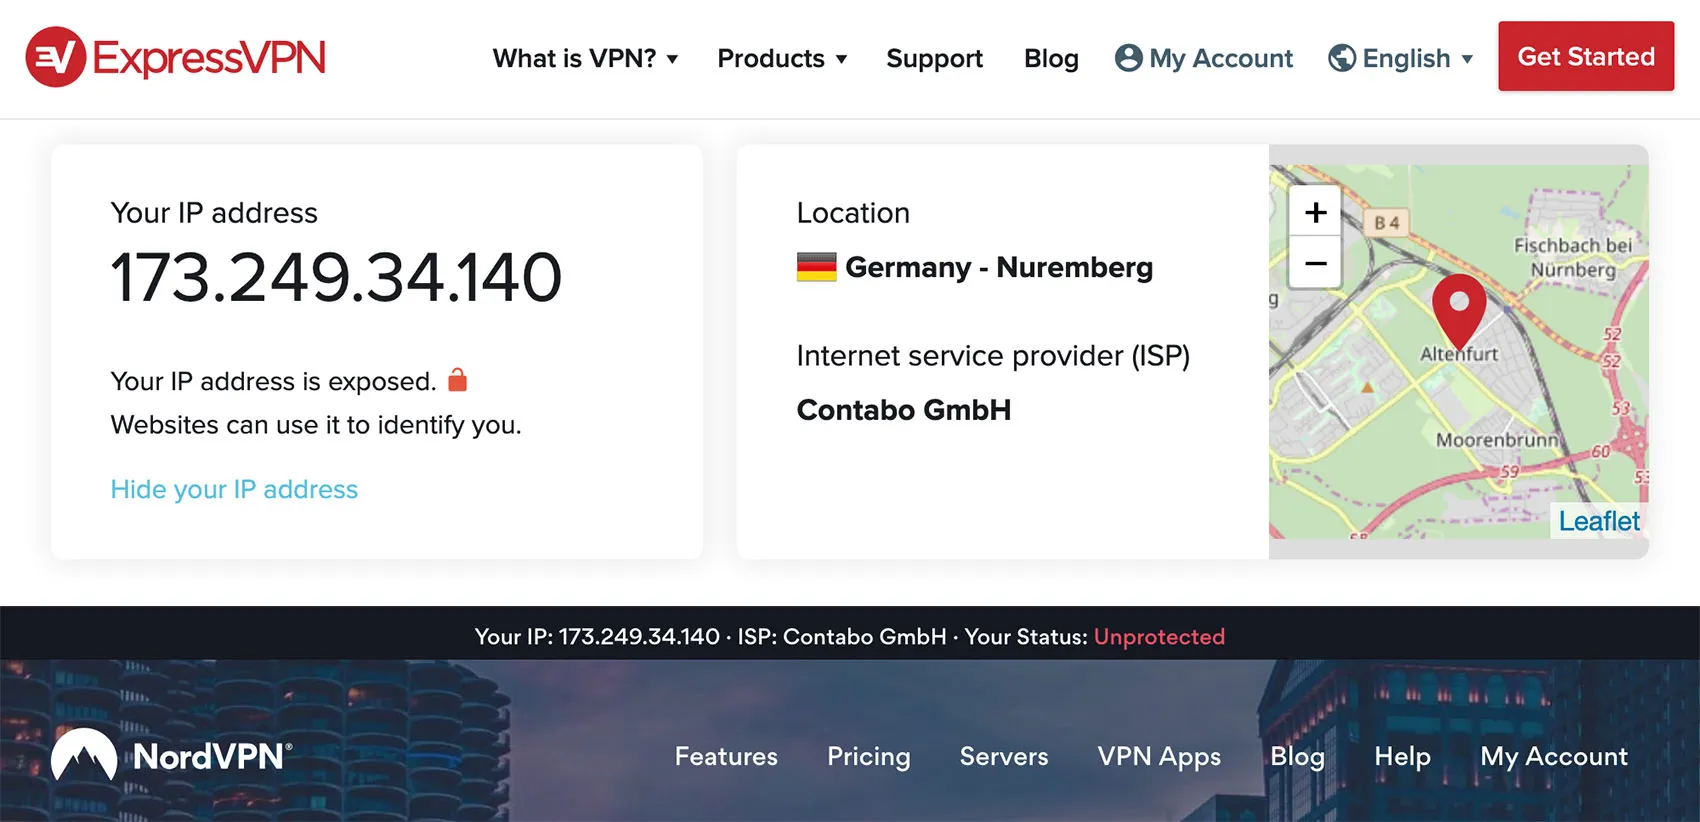 Two screenshots from VPN websites showing my "unprotected" IP address